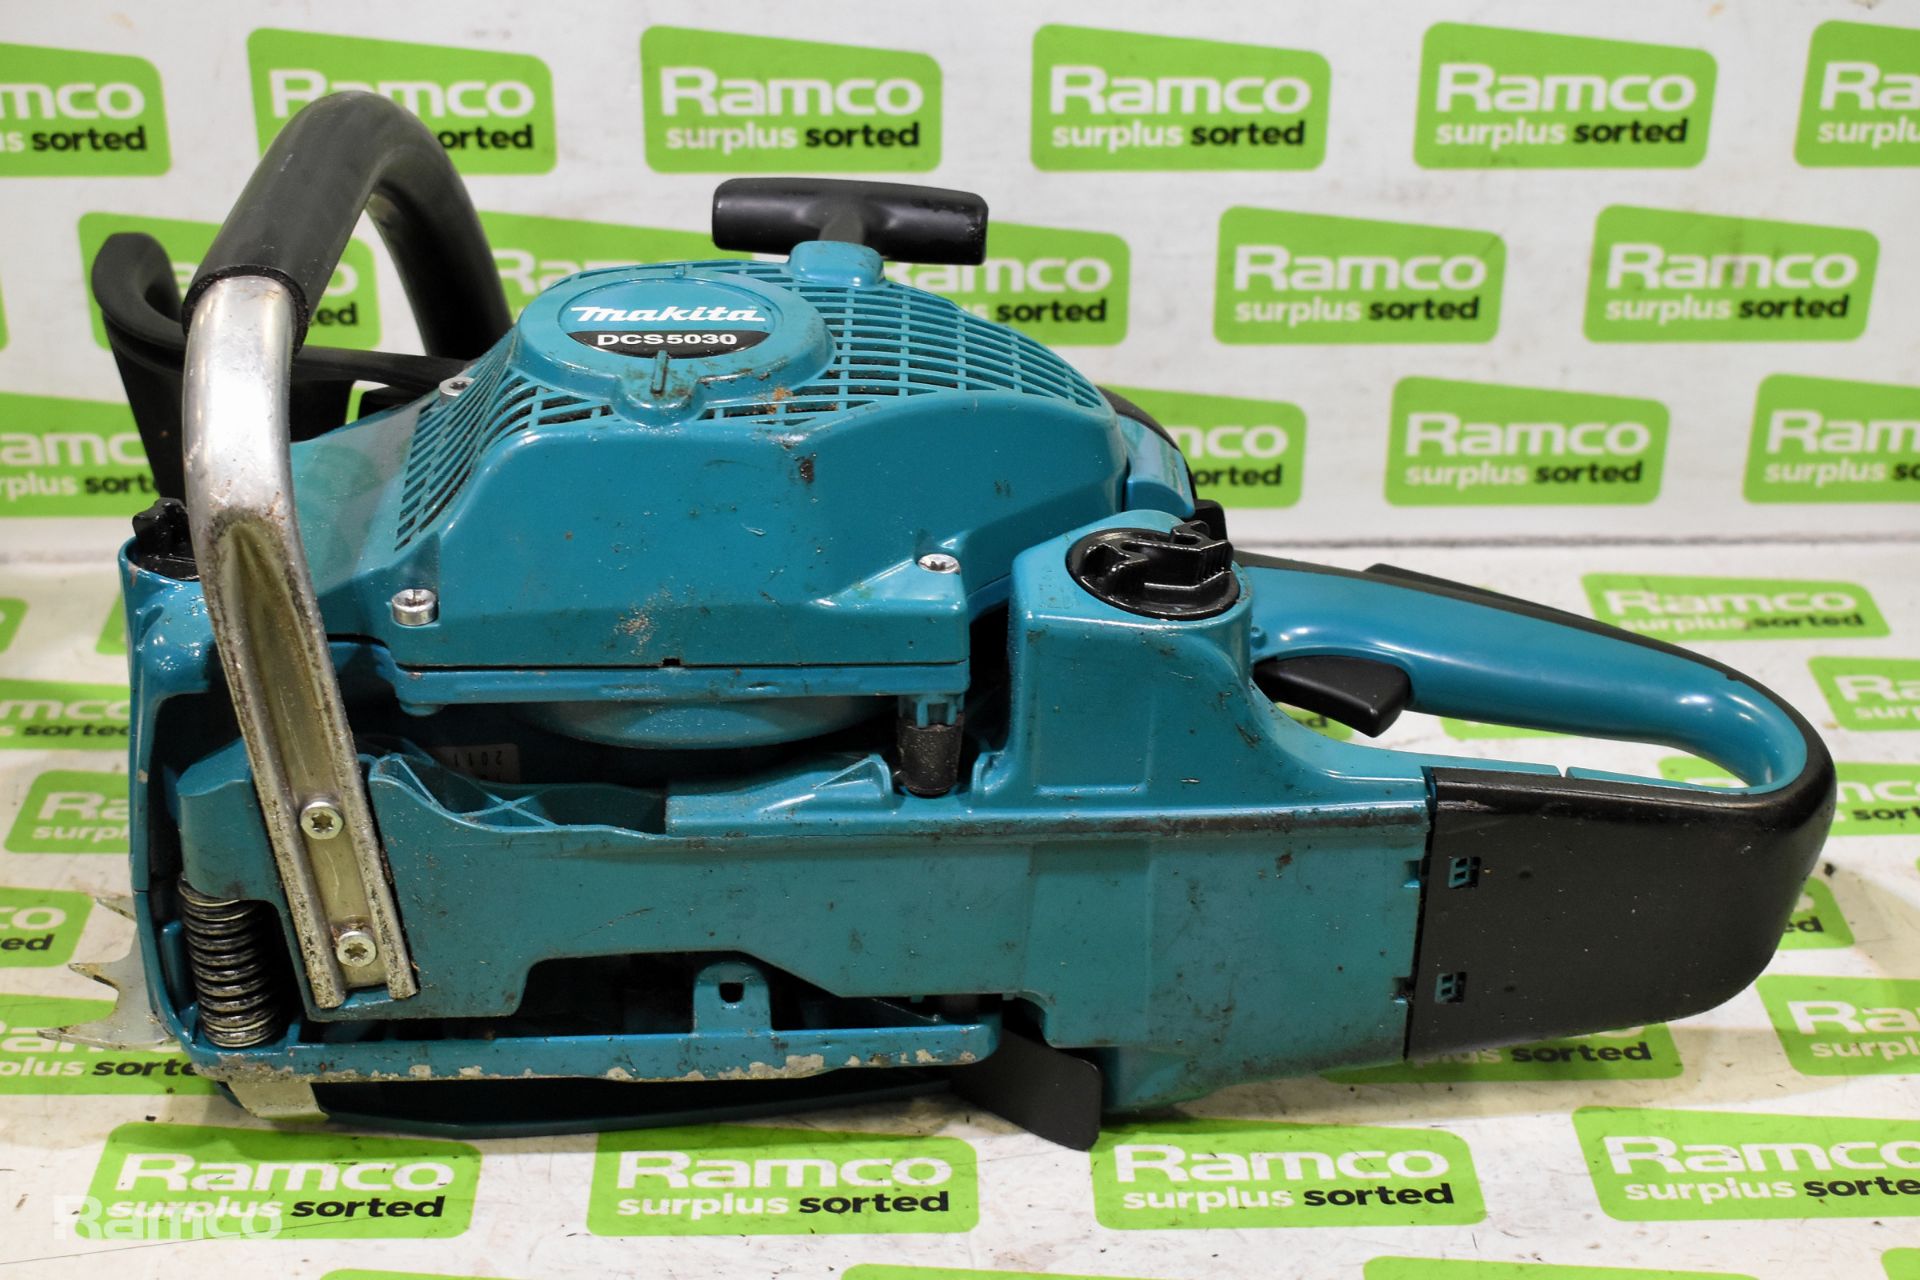 3x Makita DCS5030 50cc petrol chainsaw - BODIES ONLY - AS SPARES AND REPAIRS, 1x Makita EA5000P - Image 12 of 22